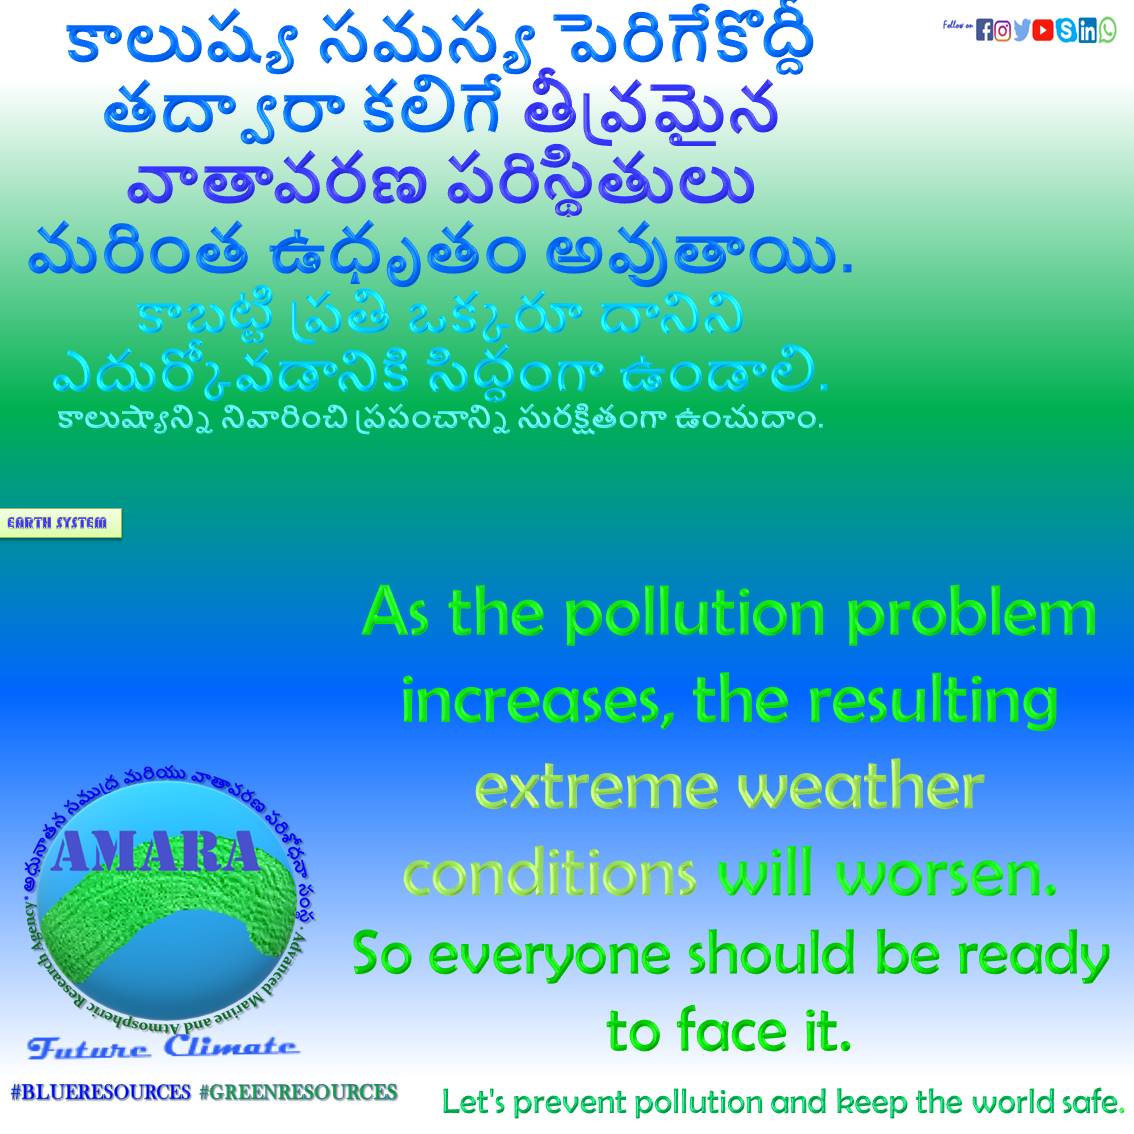 #AMARAgency #ClimateChange #Ocean #Atmosphere #Weather #Biodiversity #Environment #Ecologicalbalance #EcoFriendly #Nature #FossilFuel #Plastic #Chemical #Pollution #Climate #GlobalWarming #Agriculture #NaturalResource #Life #Earth #ExtremeEvents #SocialResponsibility #EarthSystem